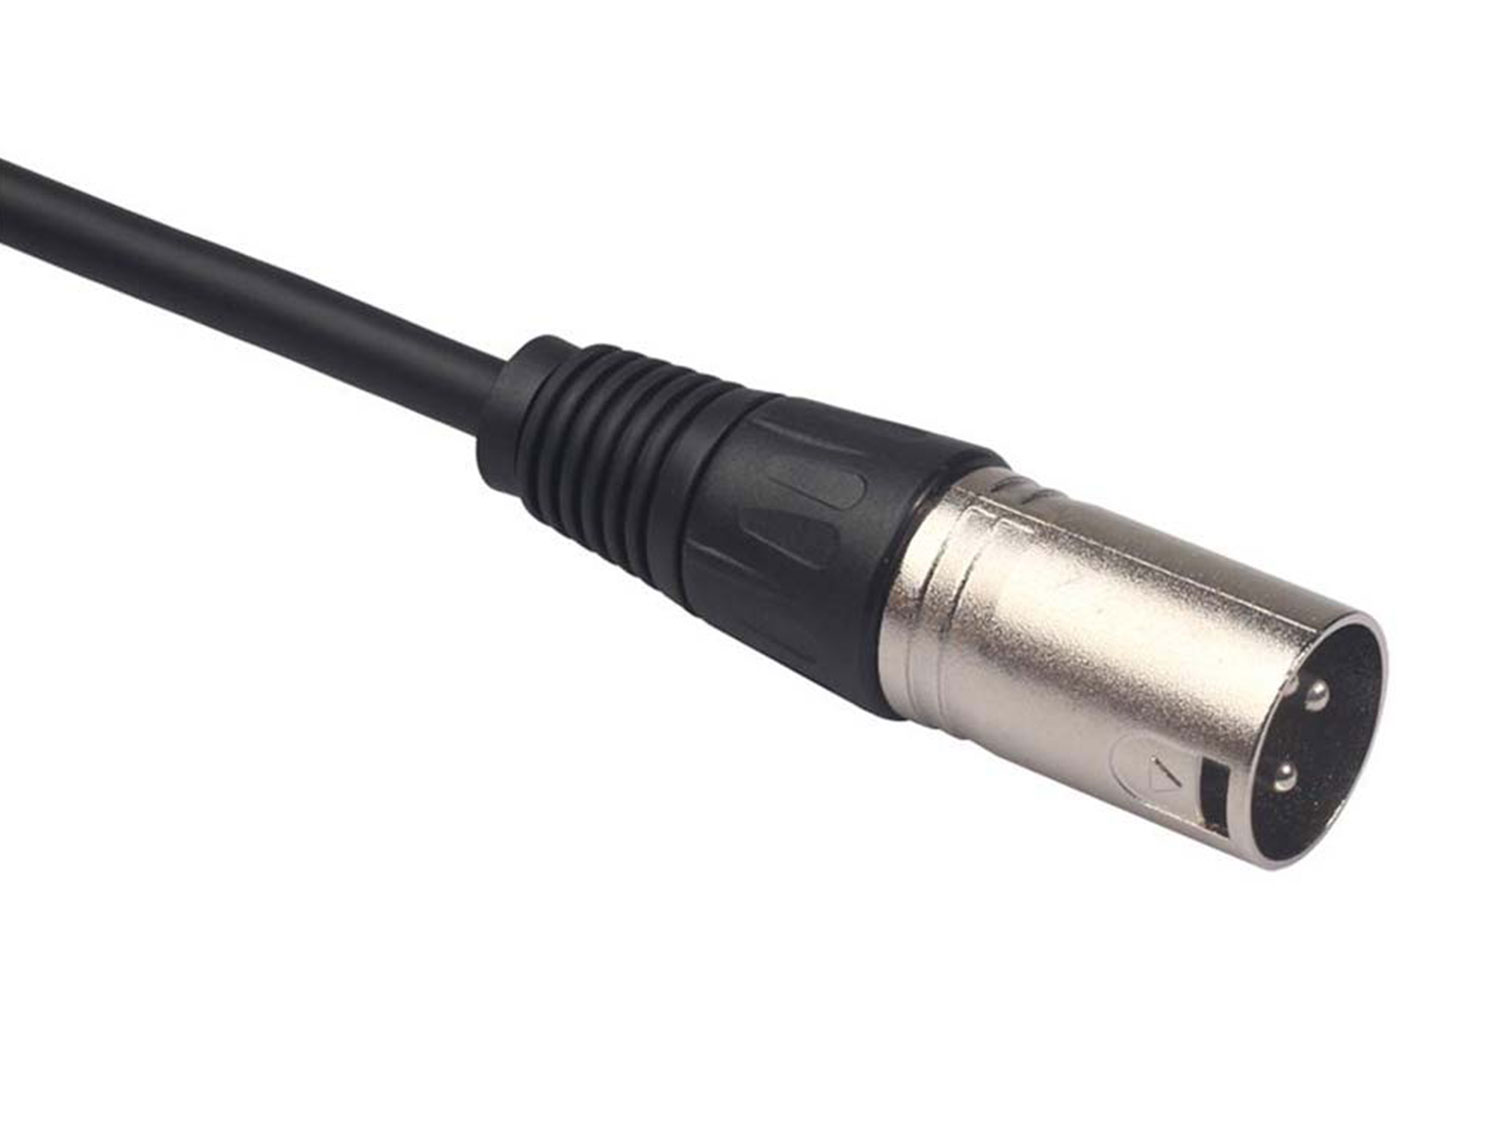 TRS 3.5mm to XLR 01 Meter Cable Male to Male for Convert Male to Male